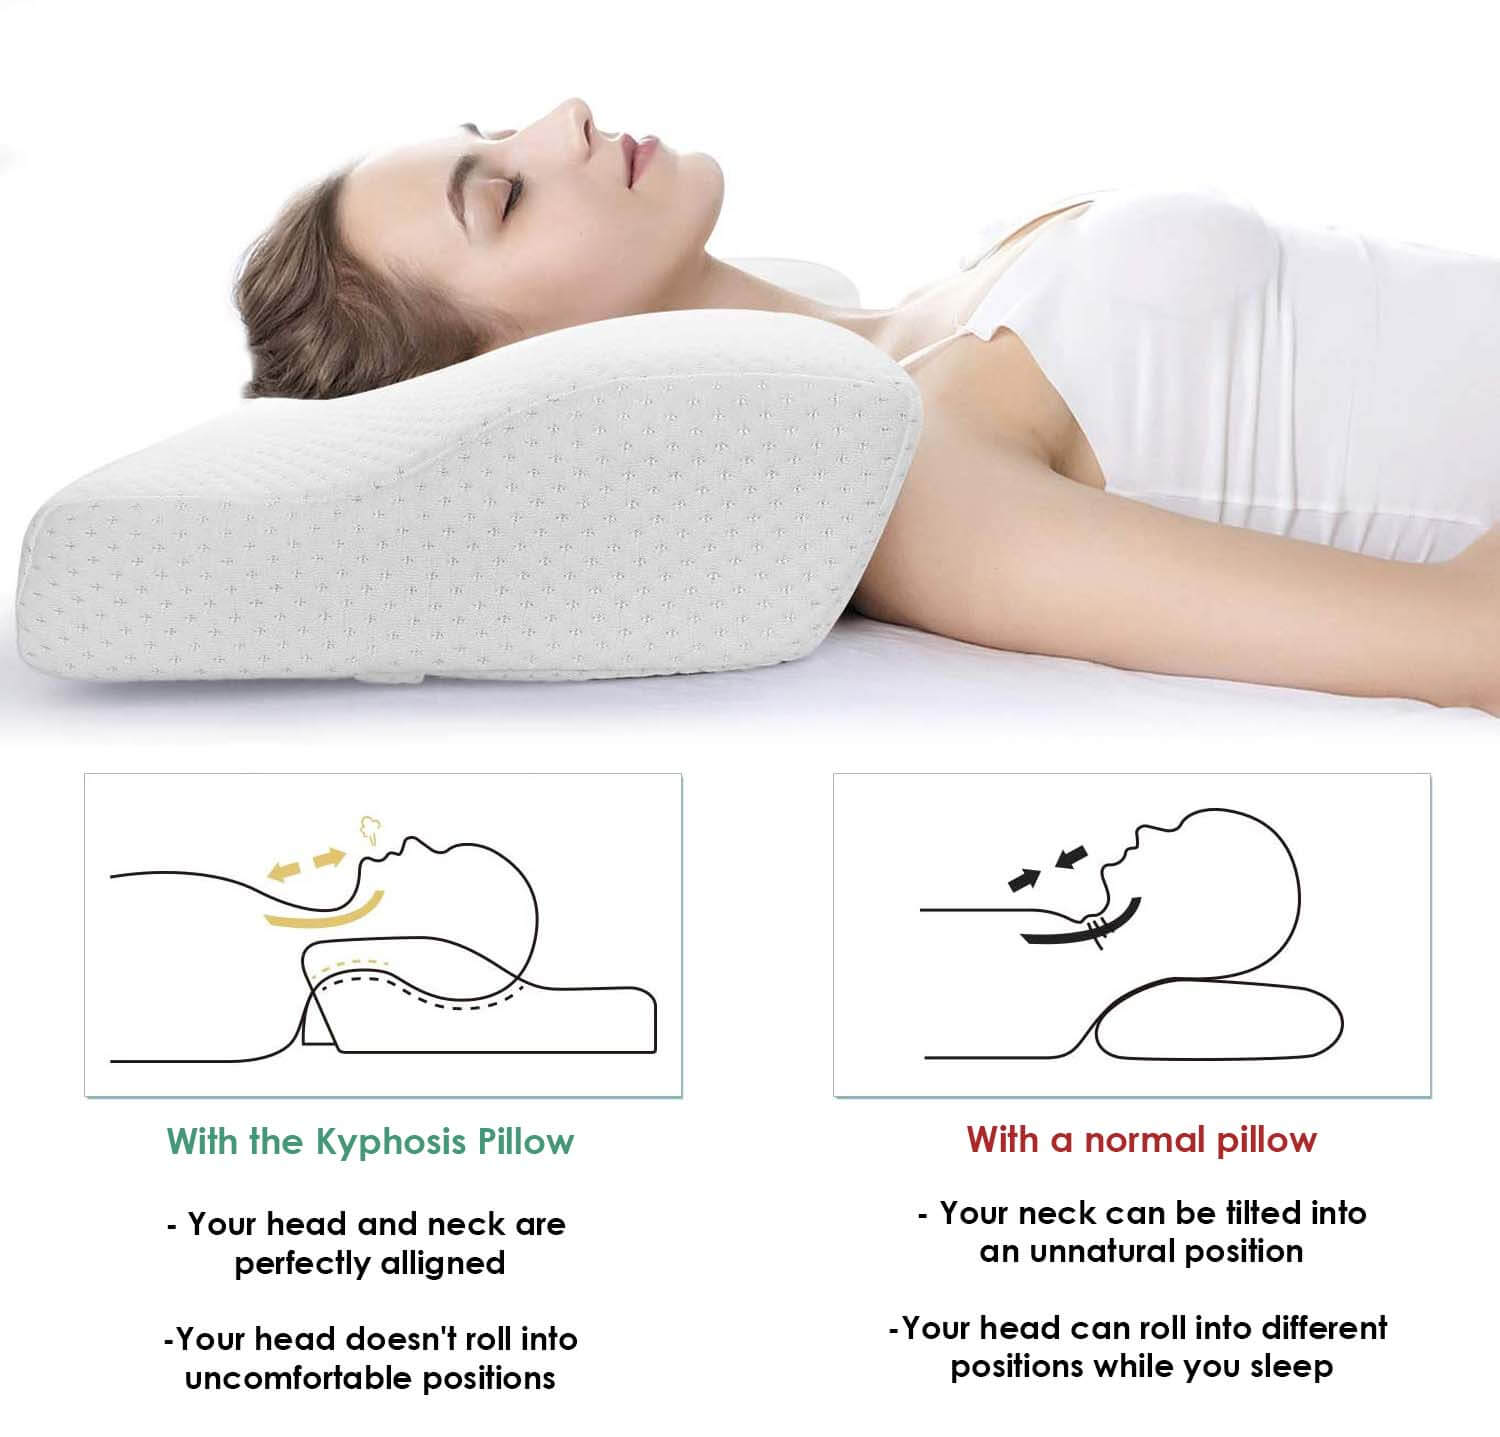 https://clevive.com/wp-content/uploads/2021/09/Kyphosis-Pillow-With-Without.jpg